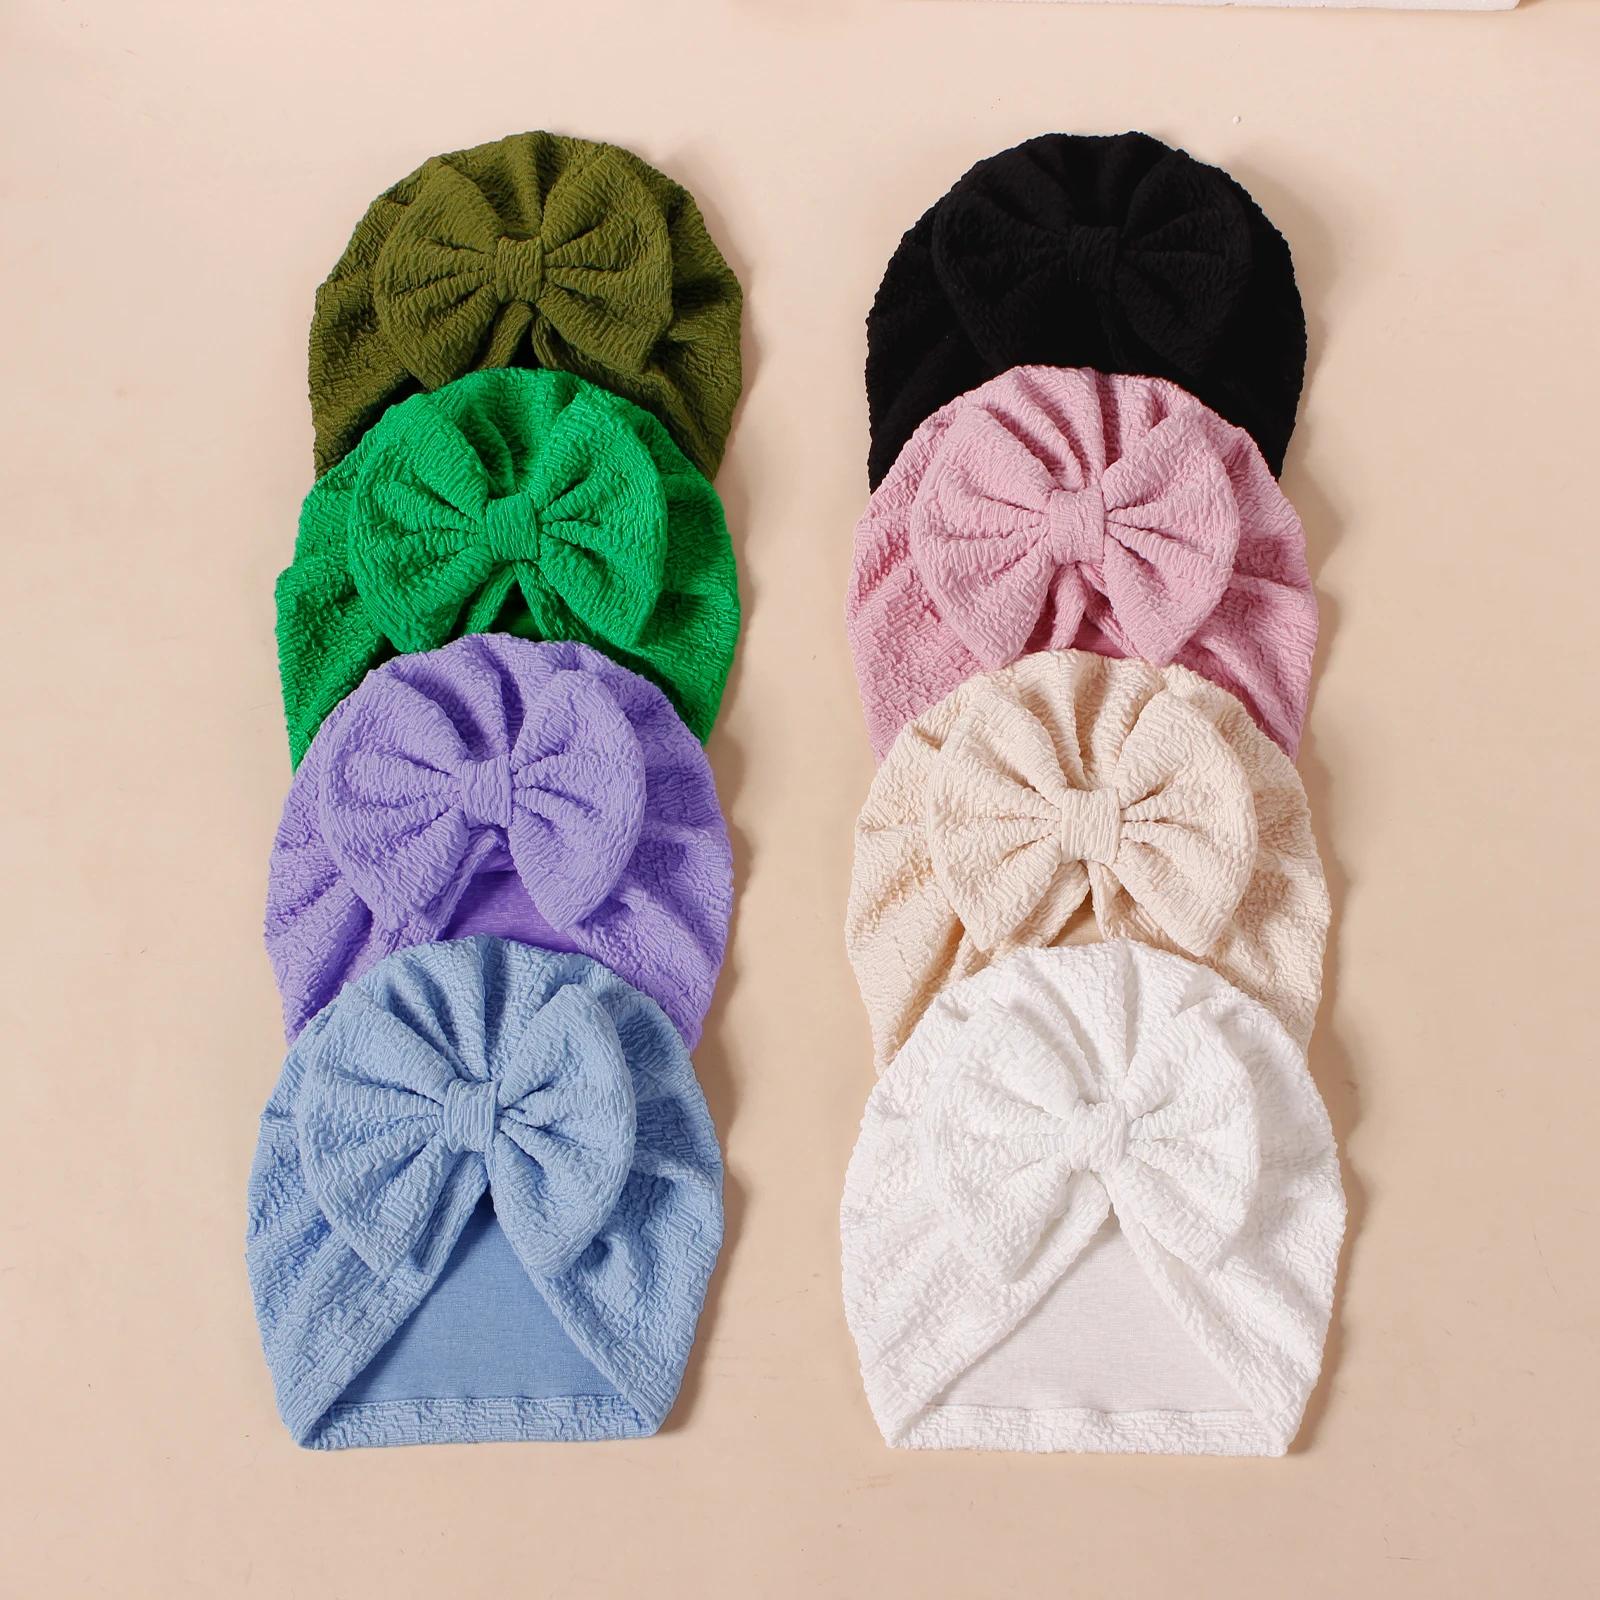 New Soft Cotton Bowknot Turban Babes Solid Color HeadWraps Solid Baby India Hat Kid Girl Infant Beanie Cap Toddler Baby Headwear kids hat and gloves set cartoon bears winter knit beanie and mittens for toddler boys girls cold weather accessories